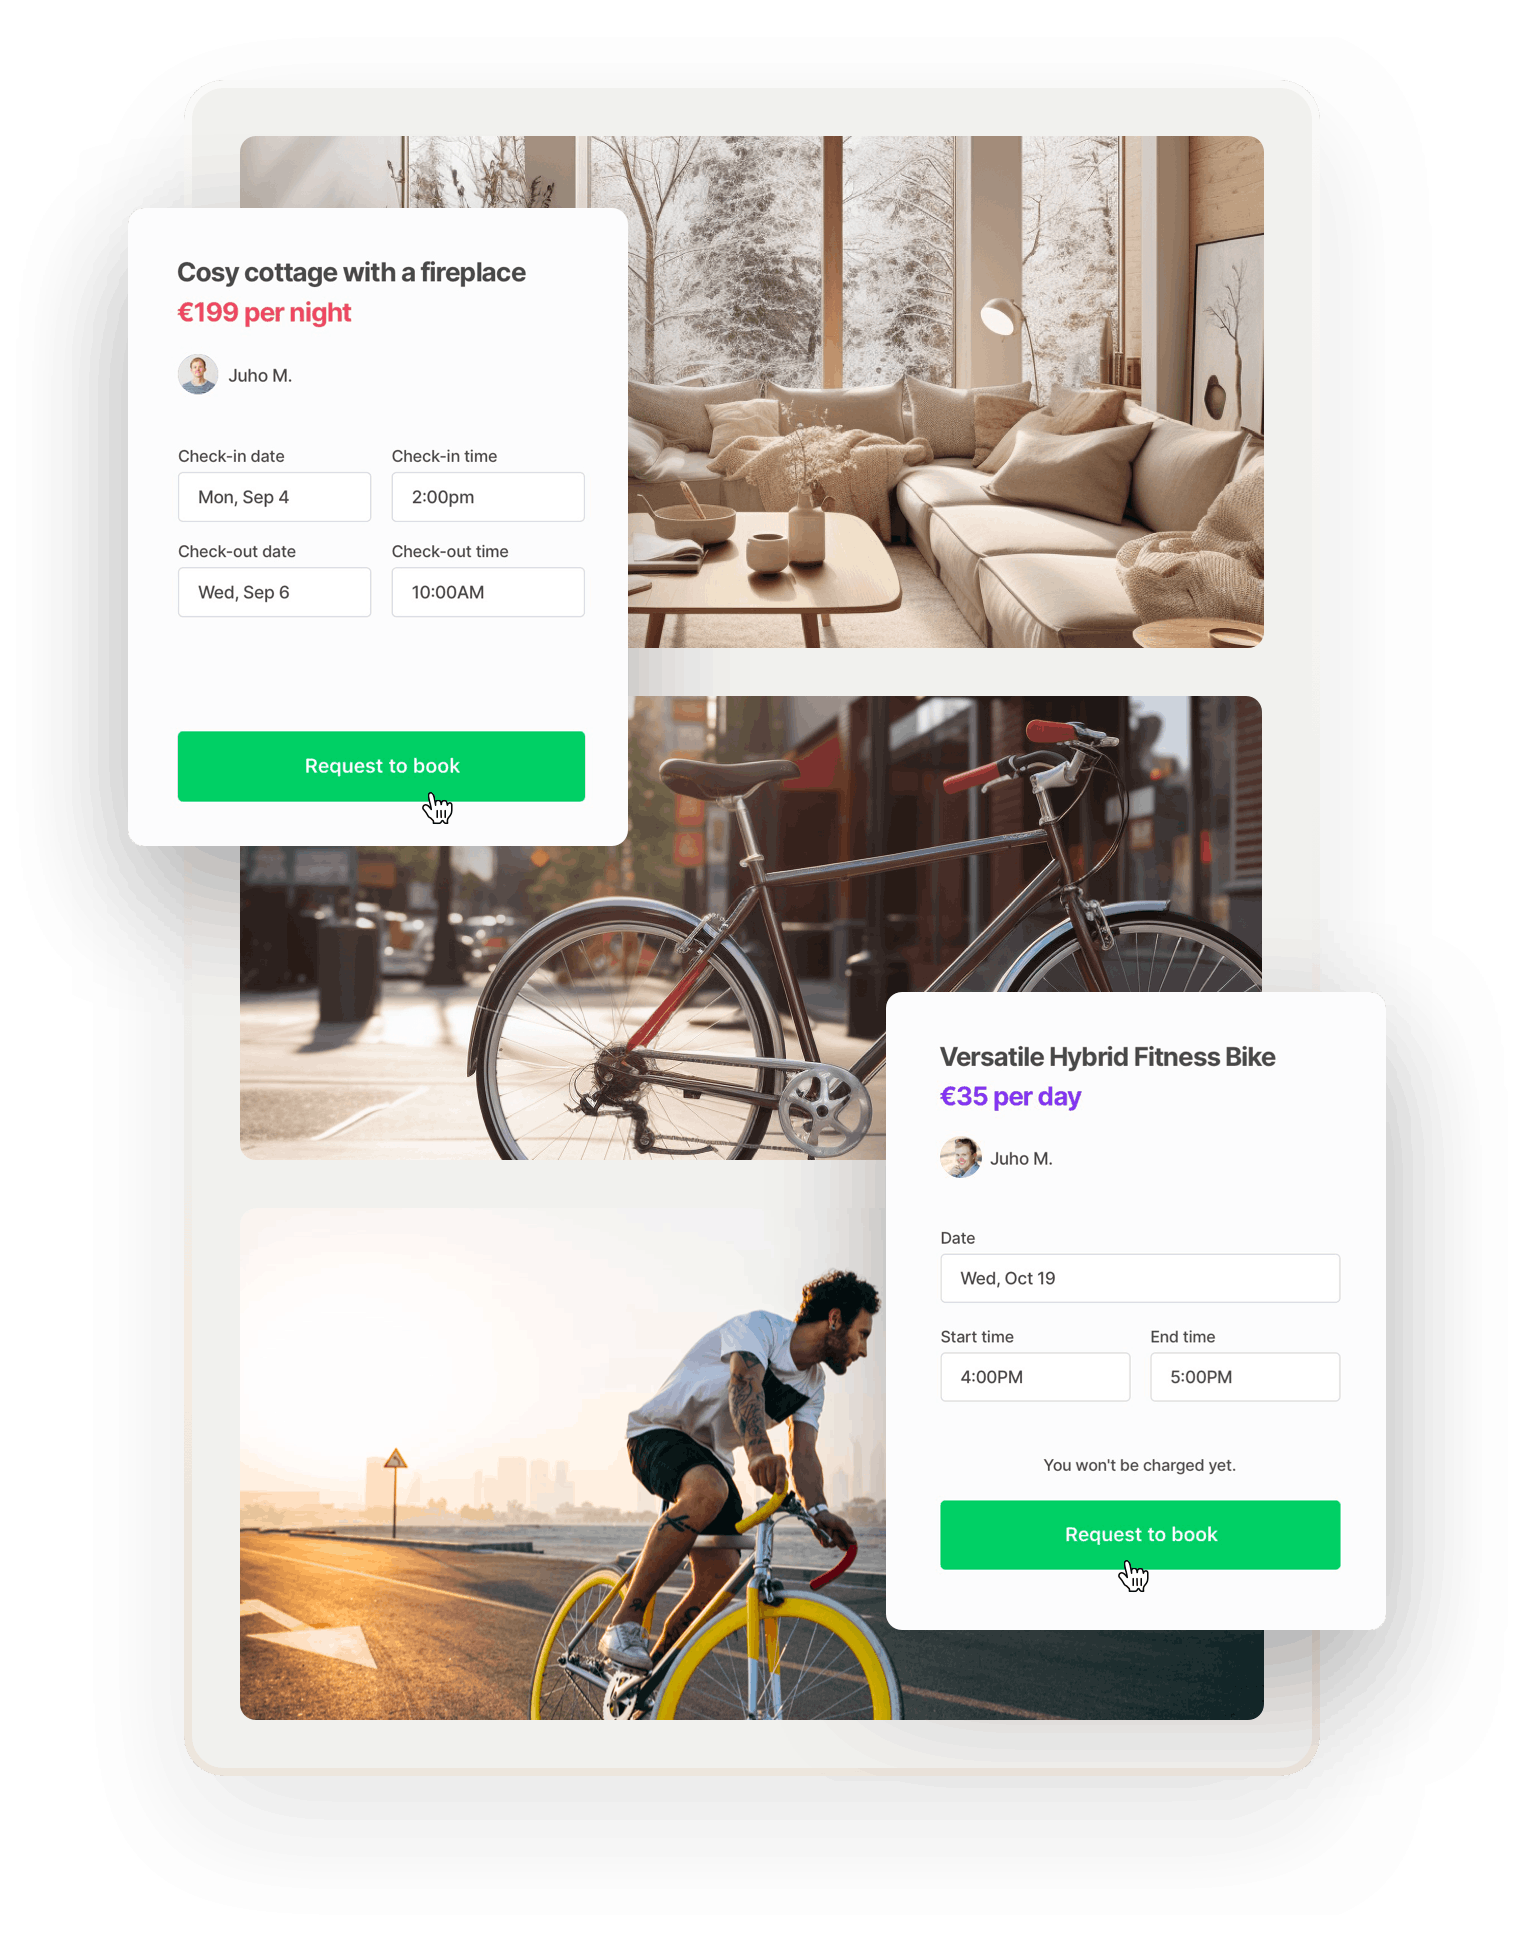 Images of a modern cottage, a city bike, and a sports bike are overlaid with two booking forms. The first is for a cozy cottage with a fireplace at 199 dollars per night. The second is for a versatile hybrid fitness bike at 35 euros per day. 